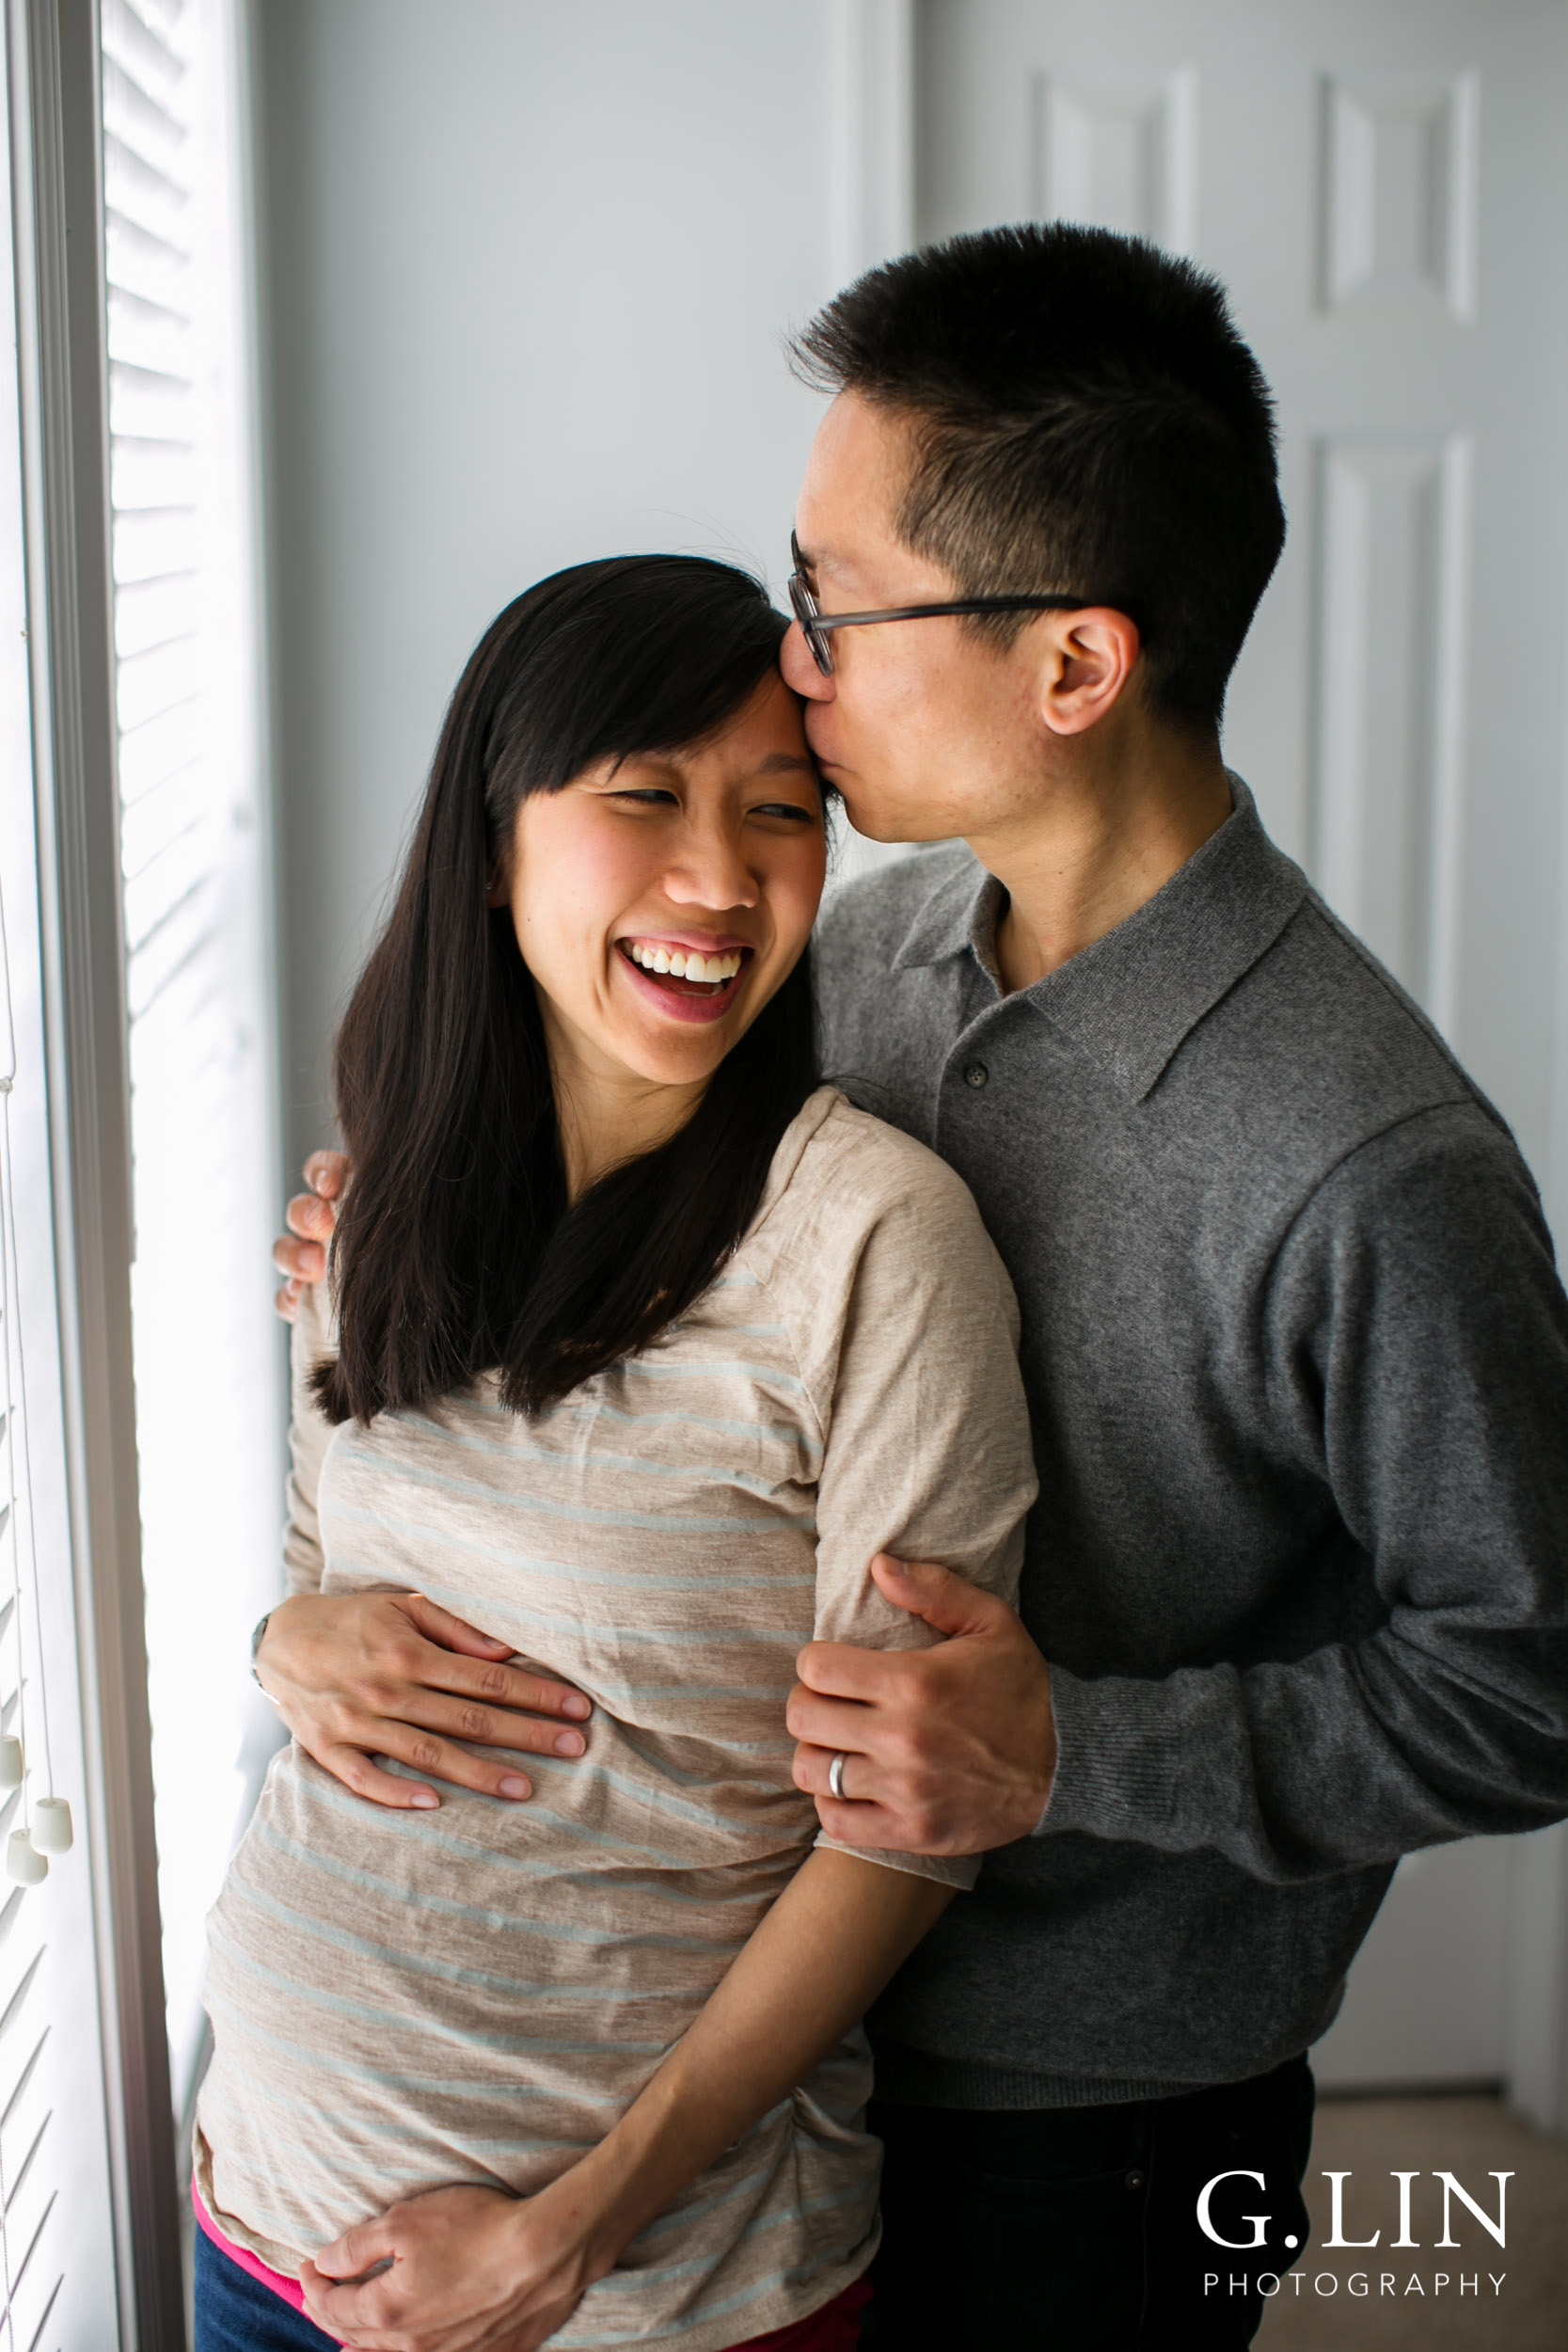 Durham Maternity Photography | G. Lin Photography | Couple standing by window and laughing